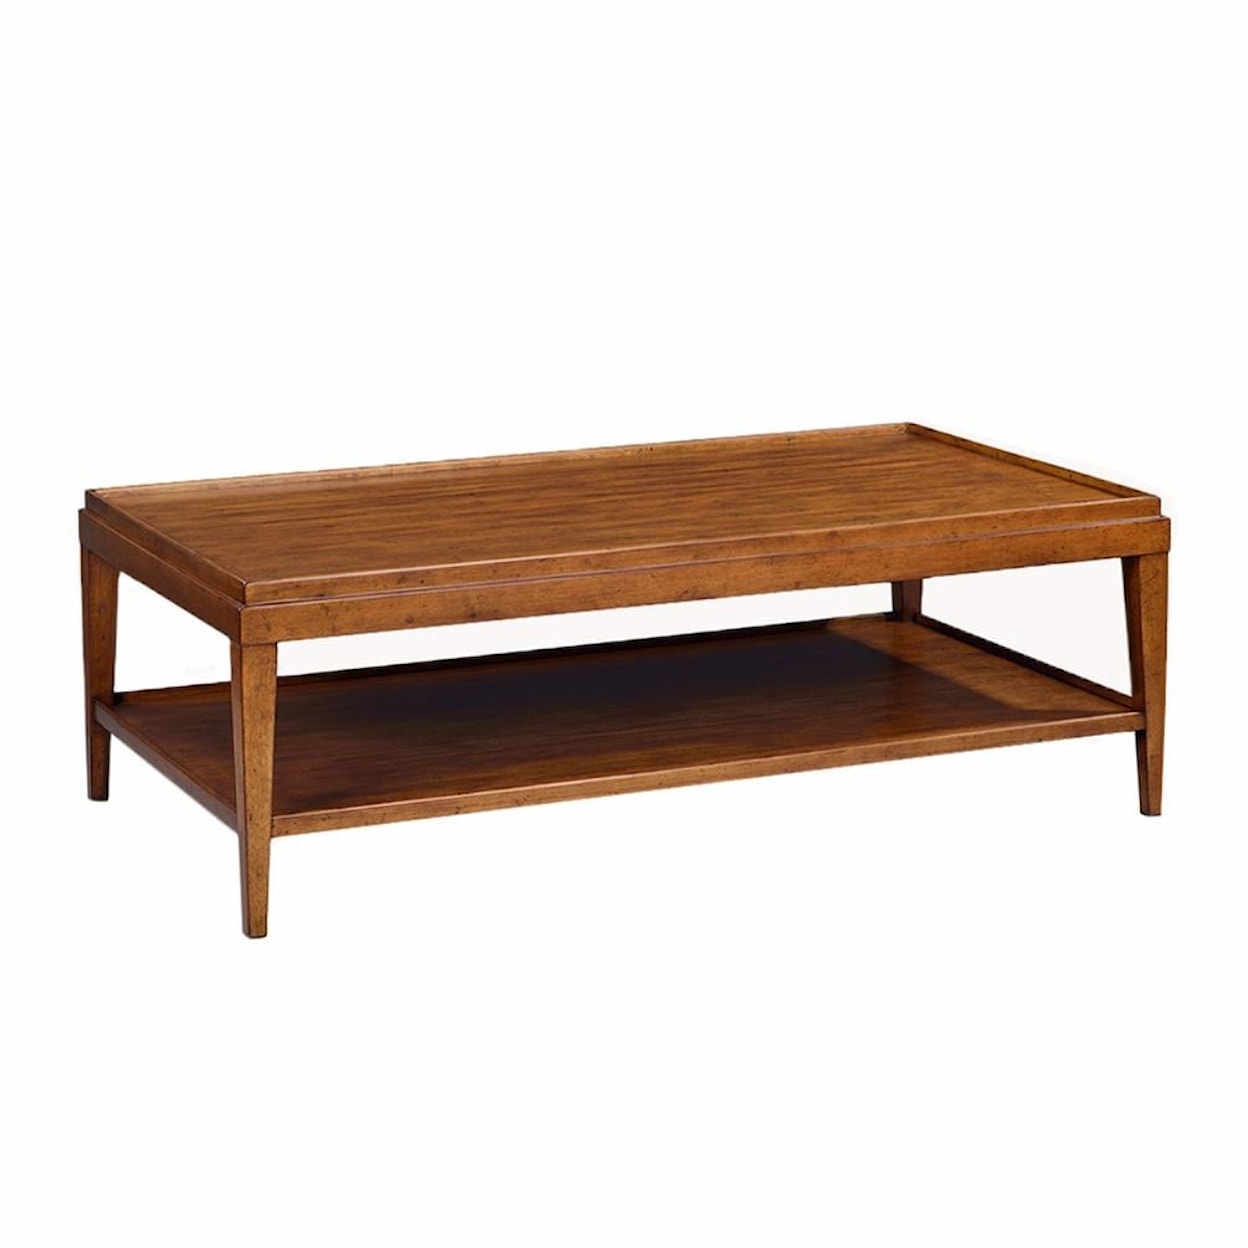 Oliver Home Furnishings Coffee Tables RECTANGLE COFFEE TABLE W/ LIP TOP- RUSTIC